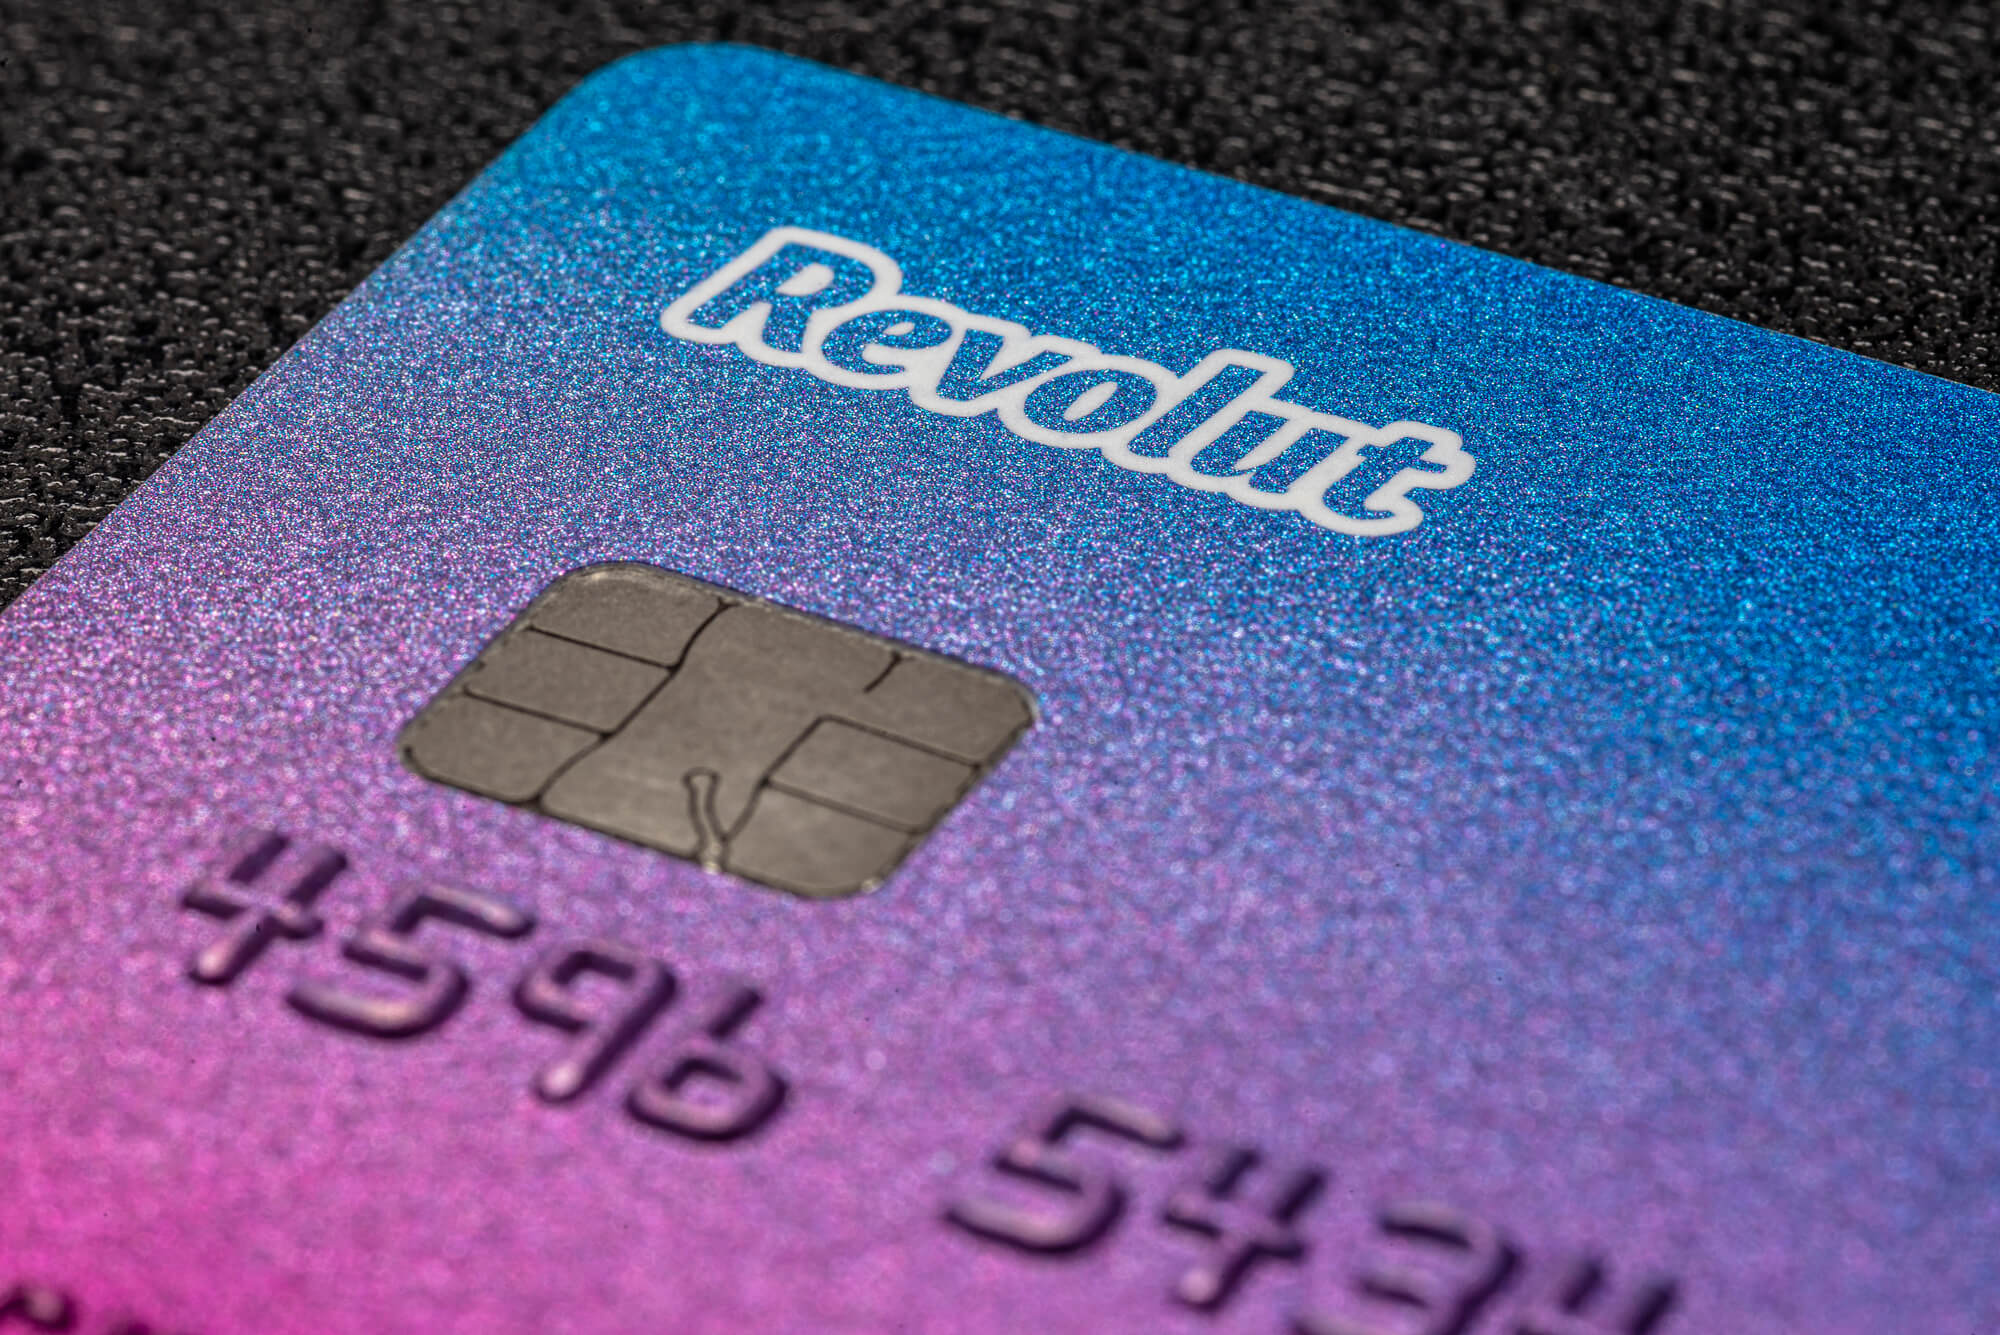 Digital bank Revolut wins approval to run UK cryptocurrency business